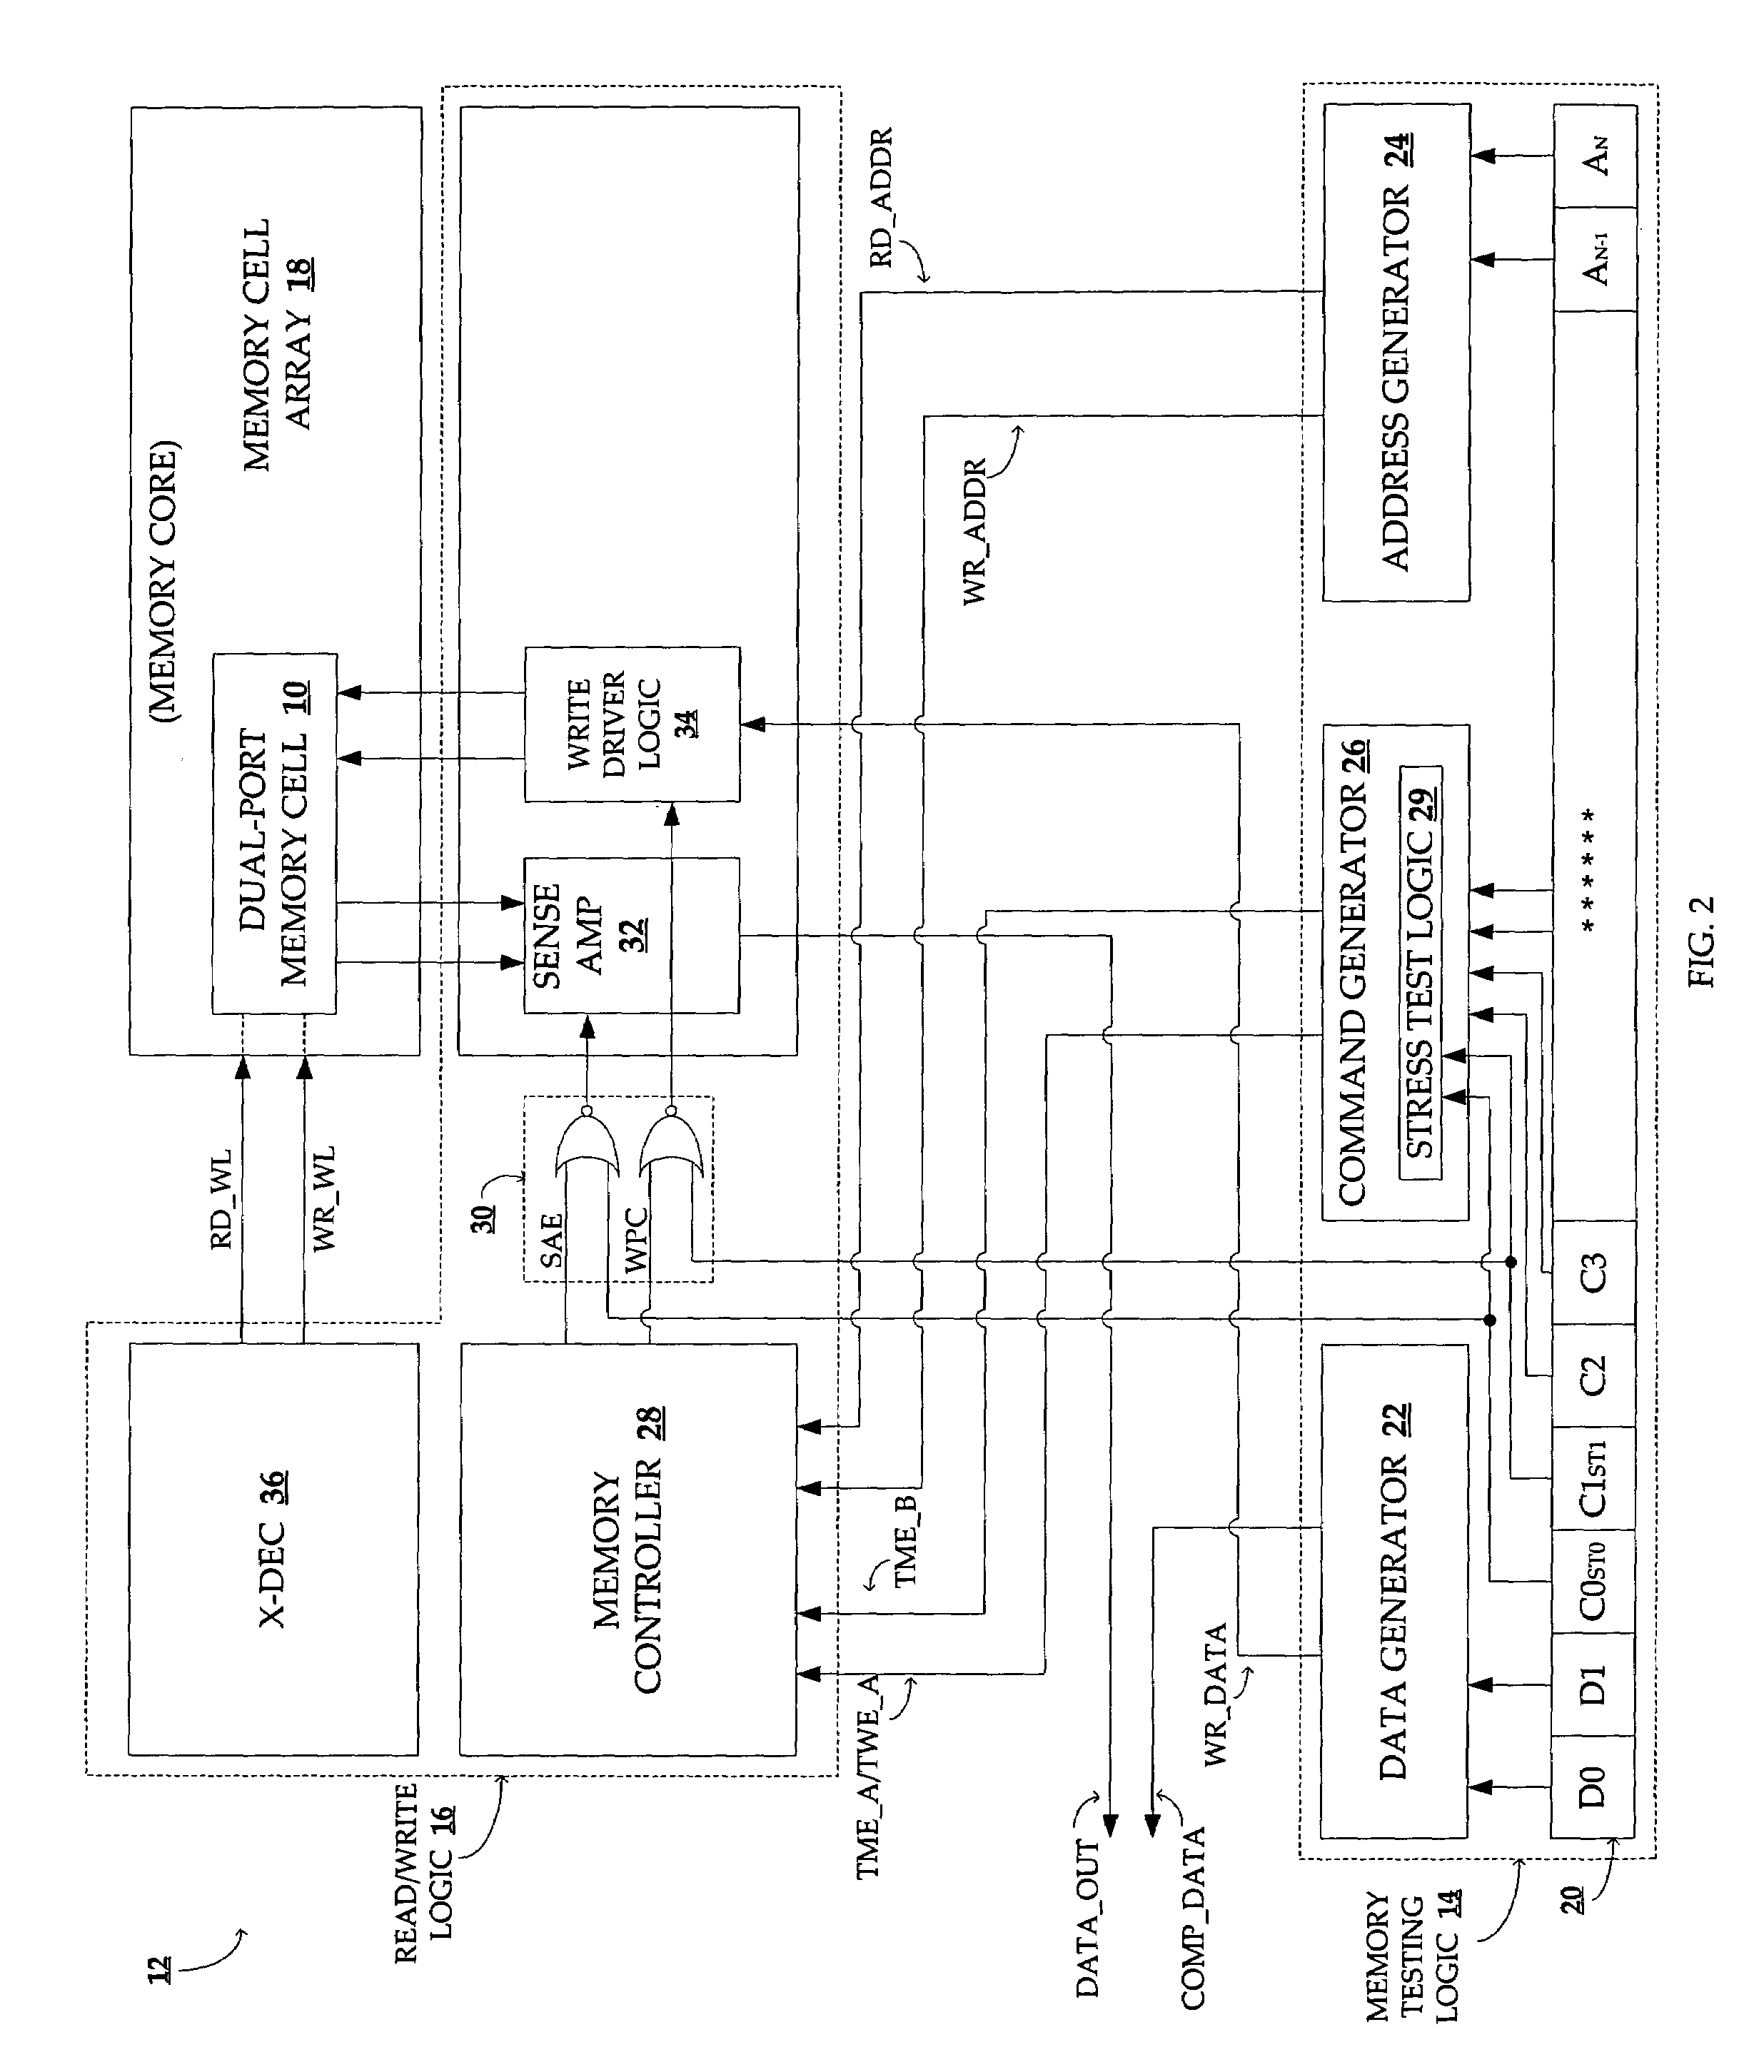 Method and system for testing a dual-port memory at speed in a stressed environment